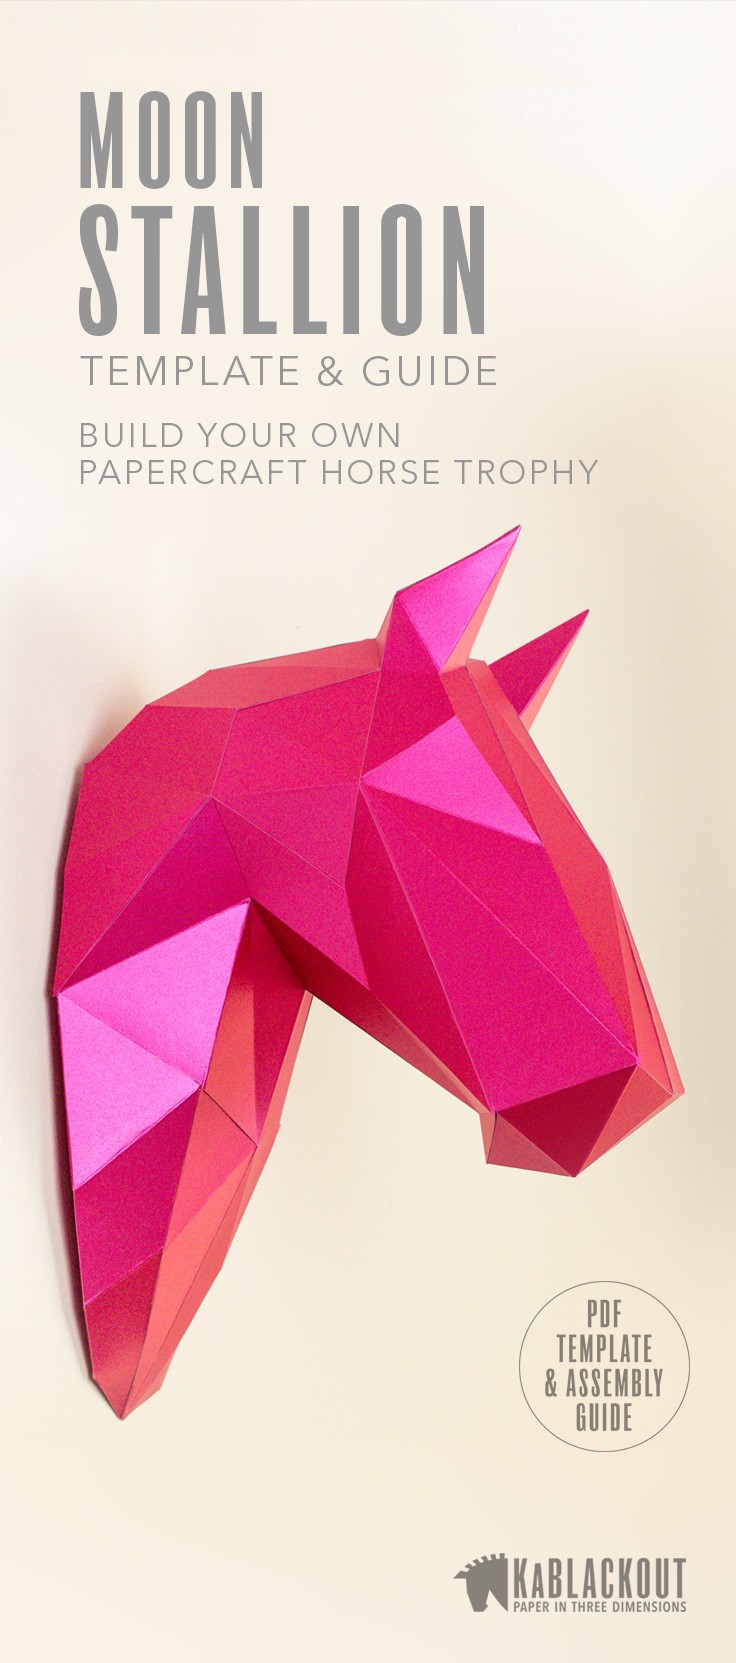 Big Head Papercraft Horse Papercraft Diy Horse Template Low Poly Horse 3d Wall Trophy